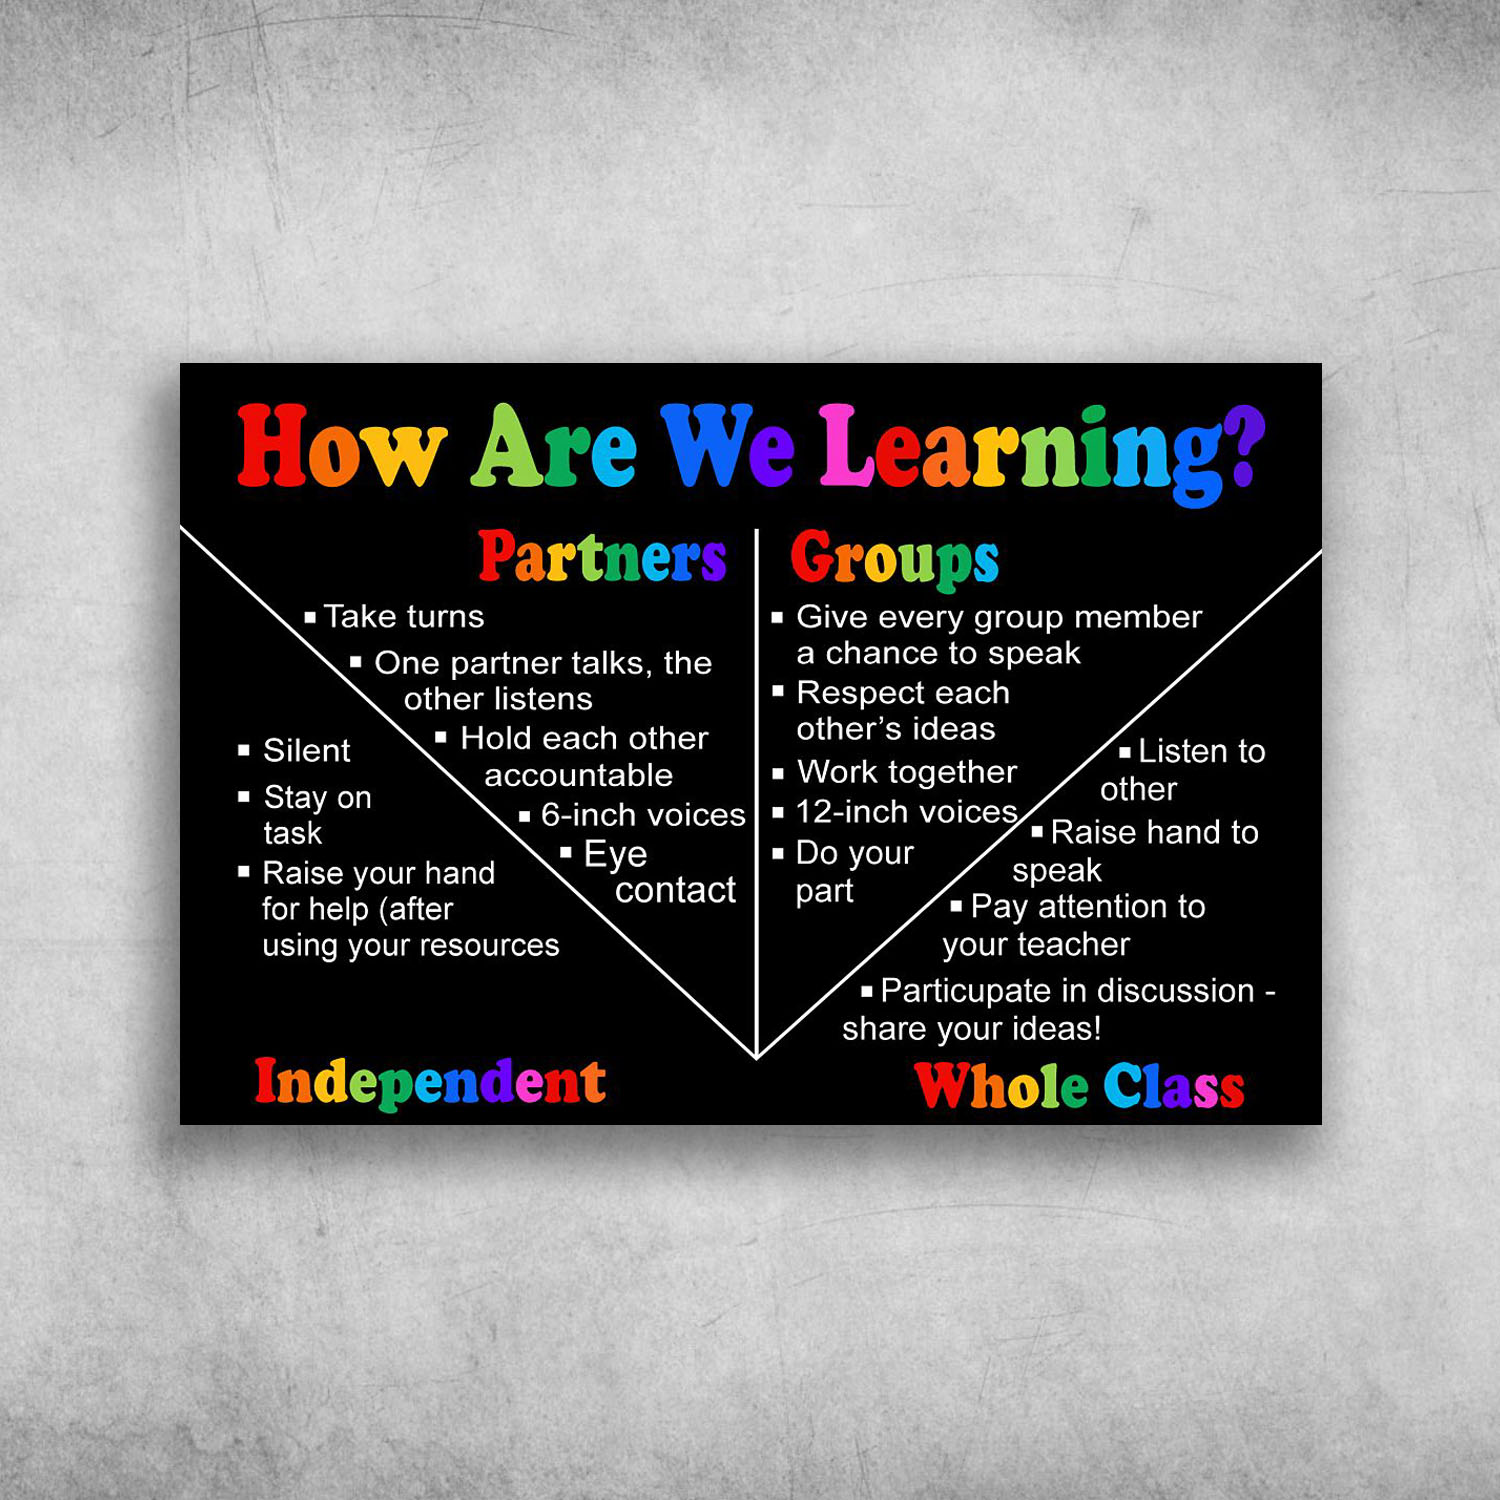 How Are We Learning Partners And Groups, Independent And Whole Class